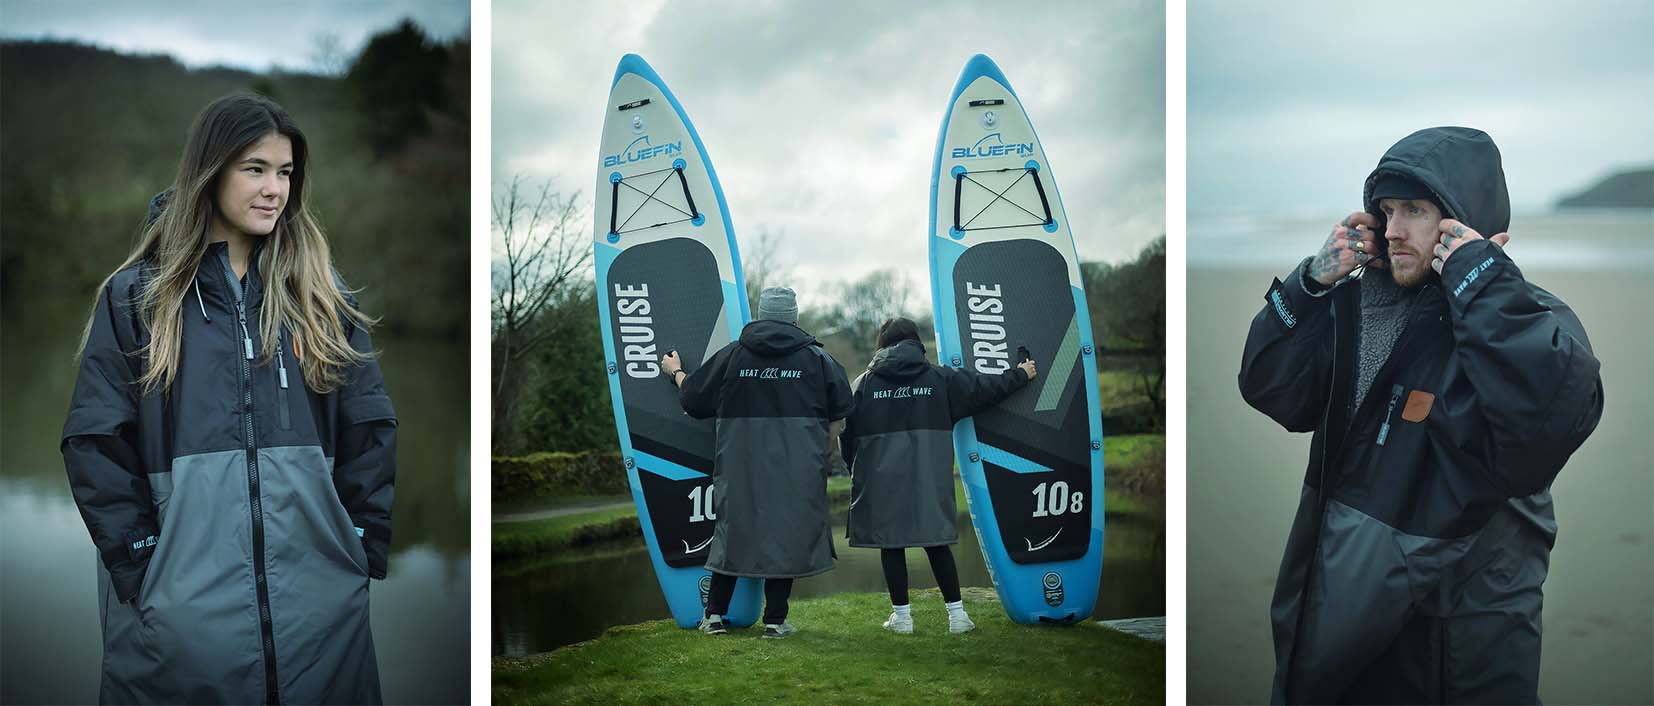 The Bluefin SUP “Heatwave” – Multifunctional Changing Robe That’s Making Massive Waves